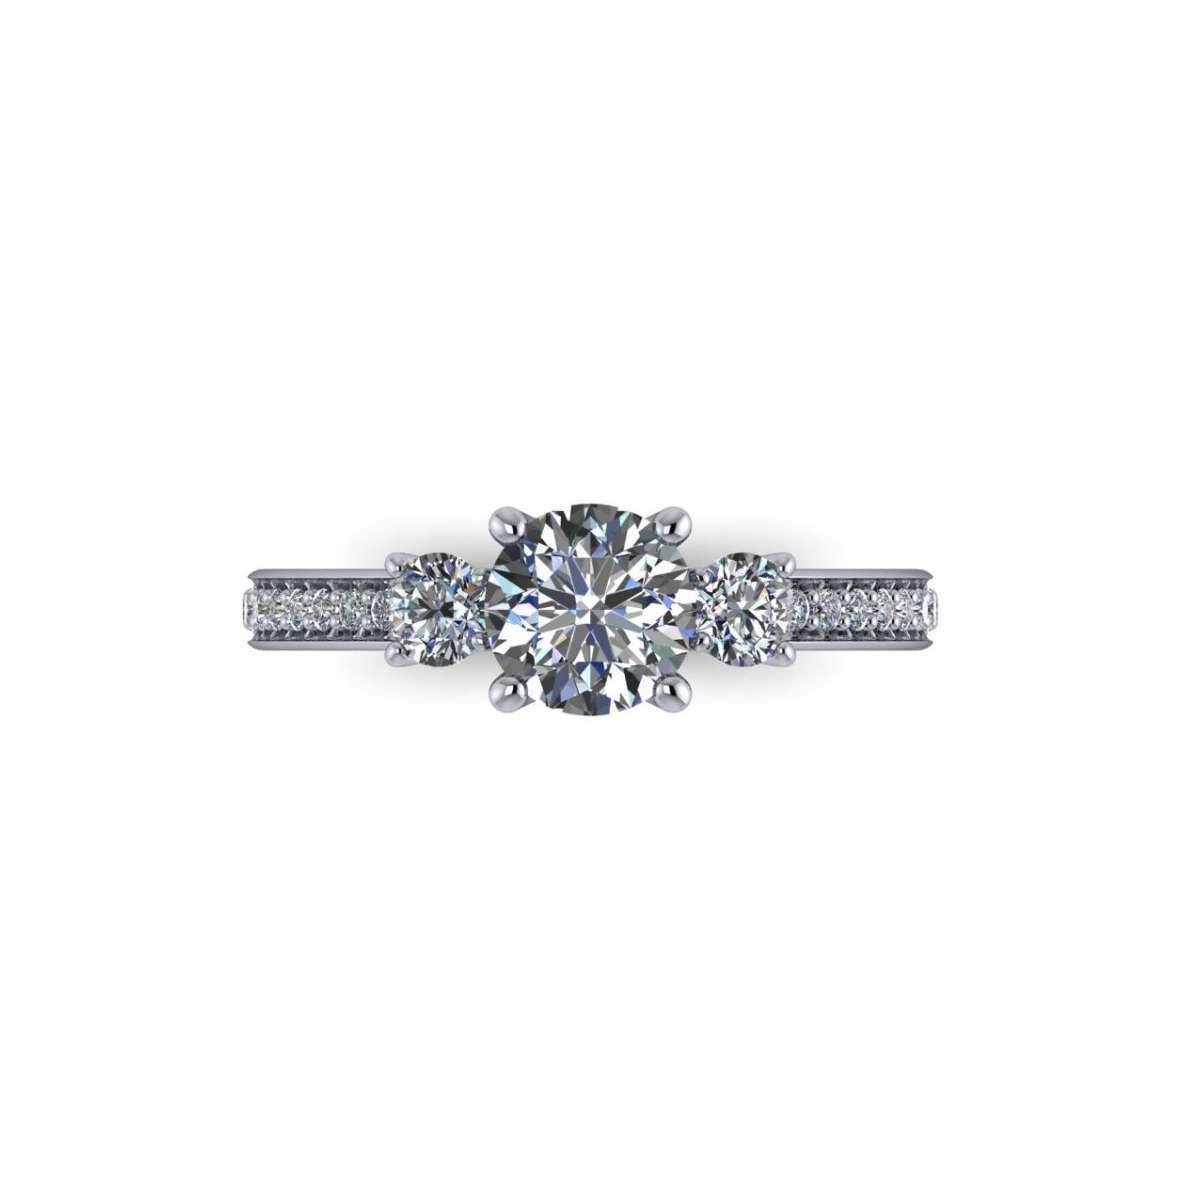 Trilogy ring in platinum 1.50 carats diamonds GIA certified G-IF